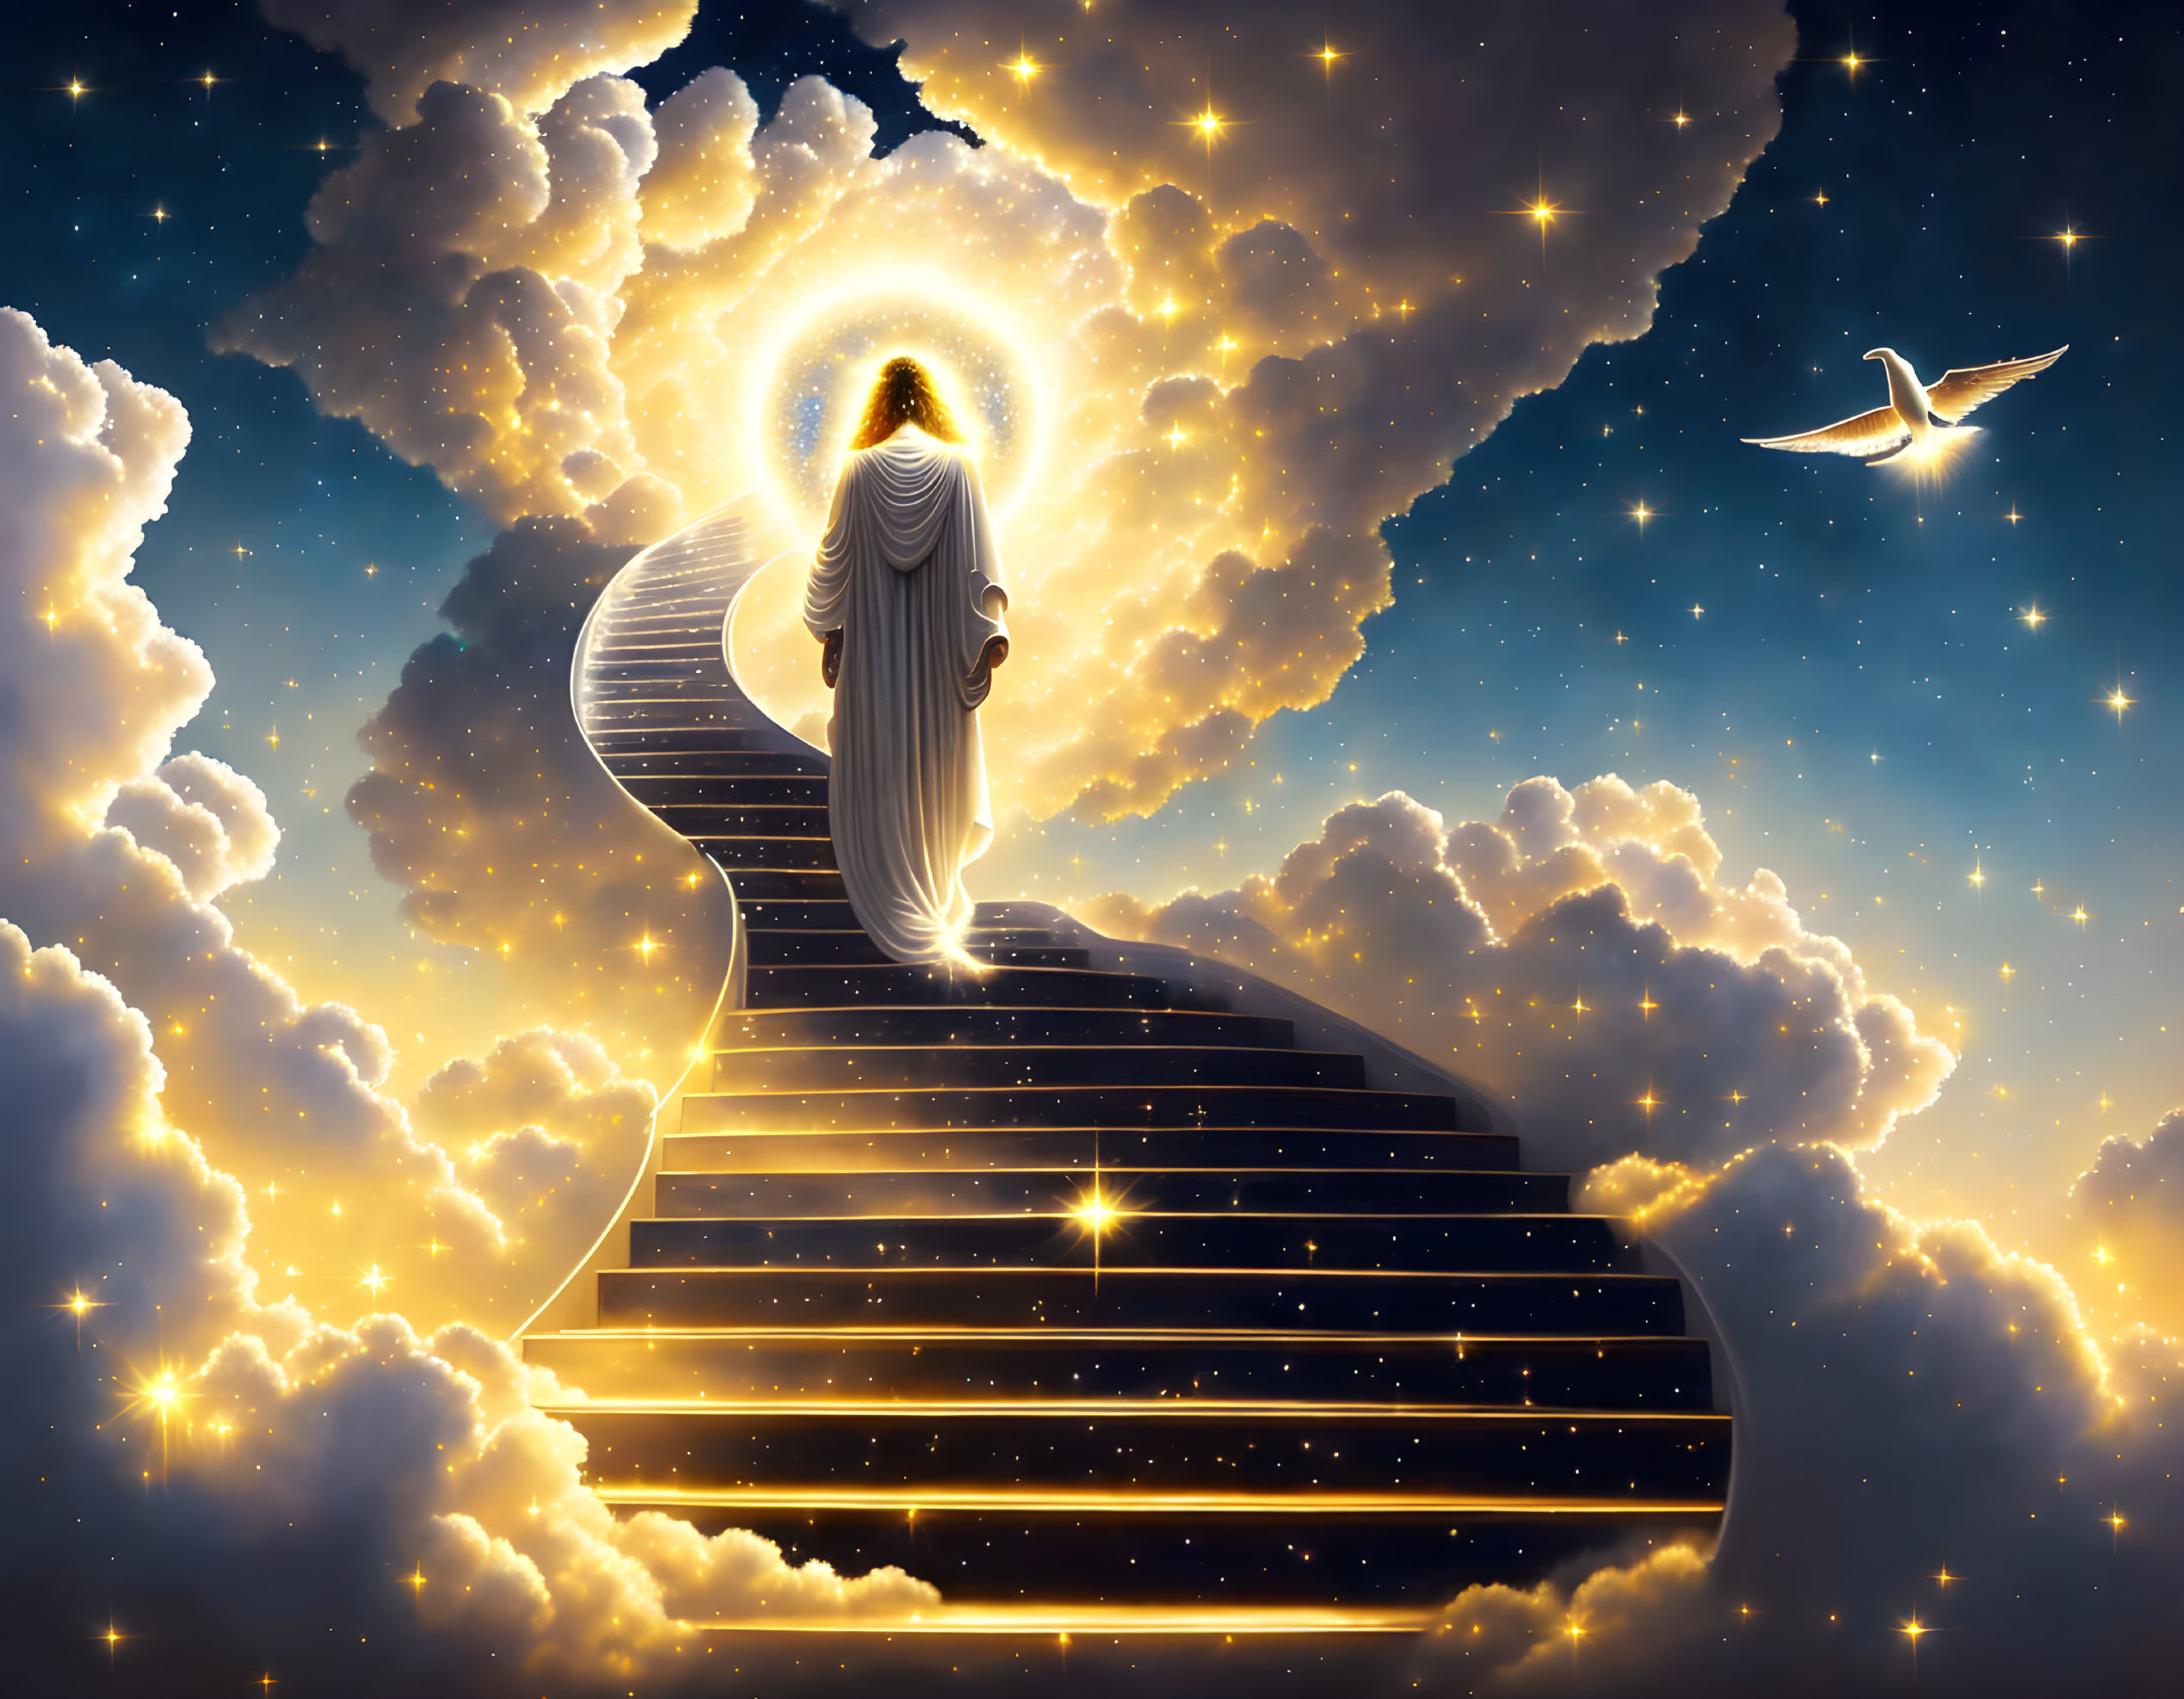 Ethereal figure with halo on stairway surrounded by stars and dove